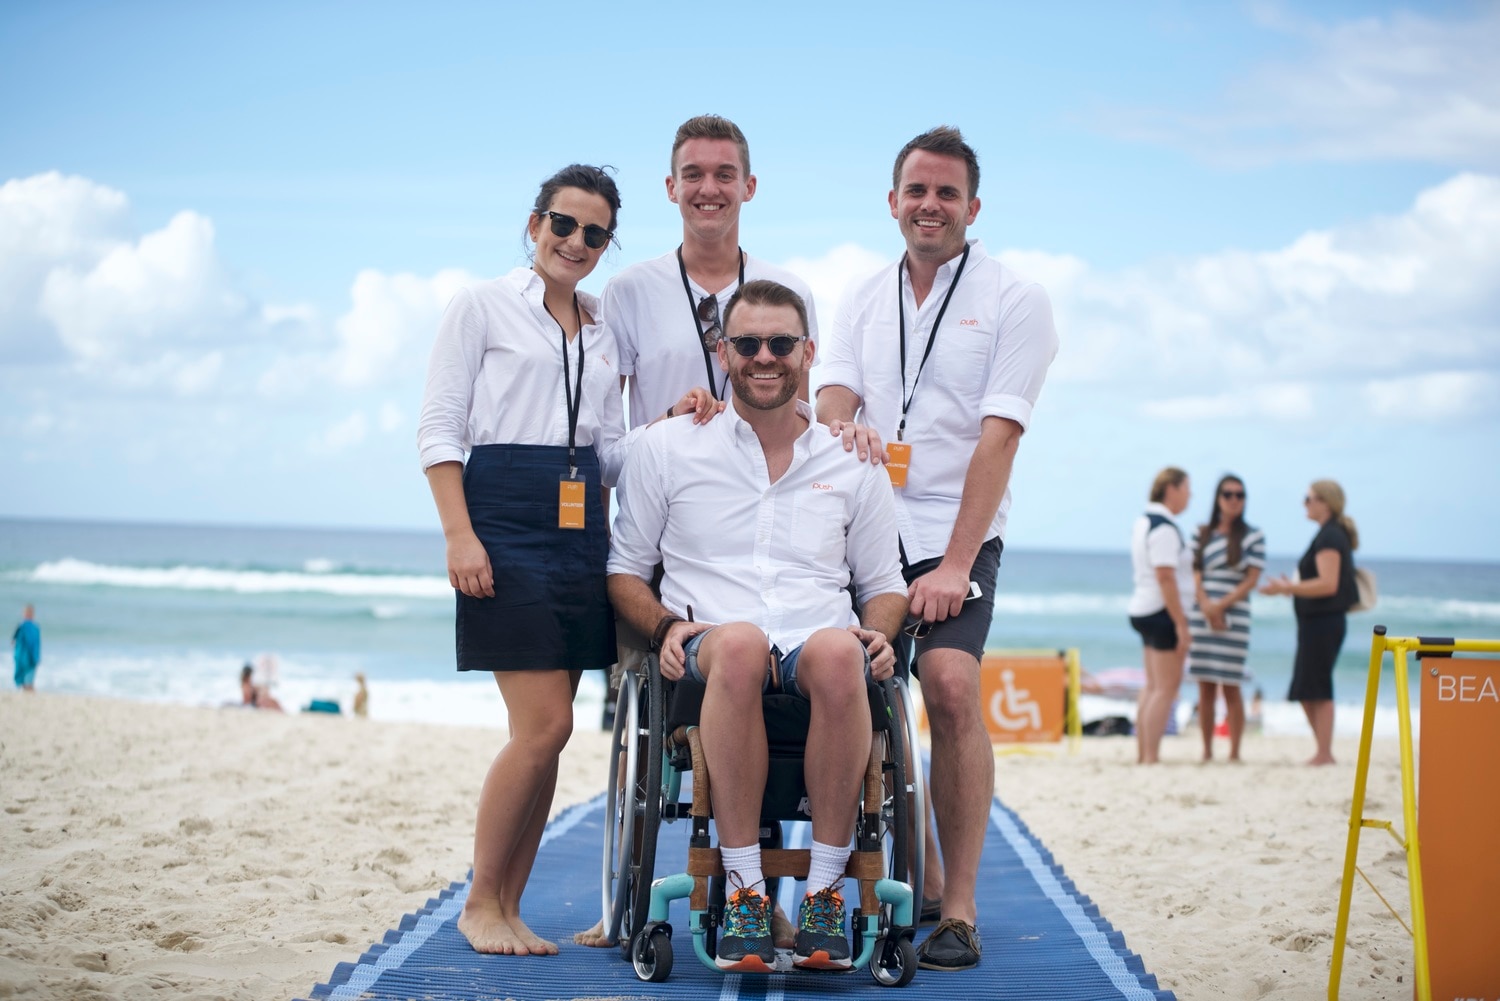 Shane Hryhorec (front) is the founder of Accessible Beaches and the director of Push Mobility.